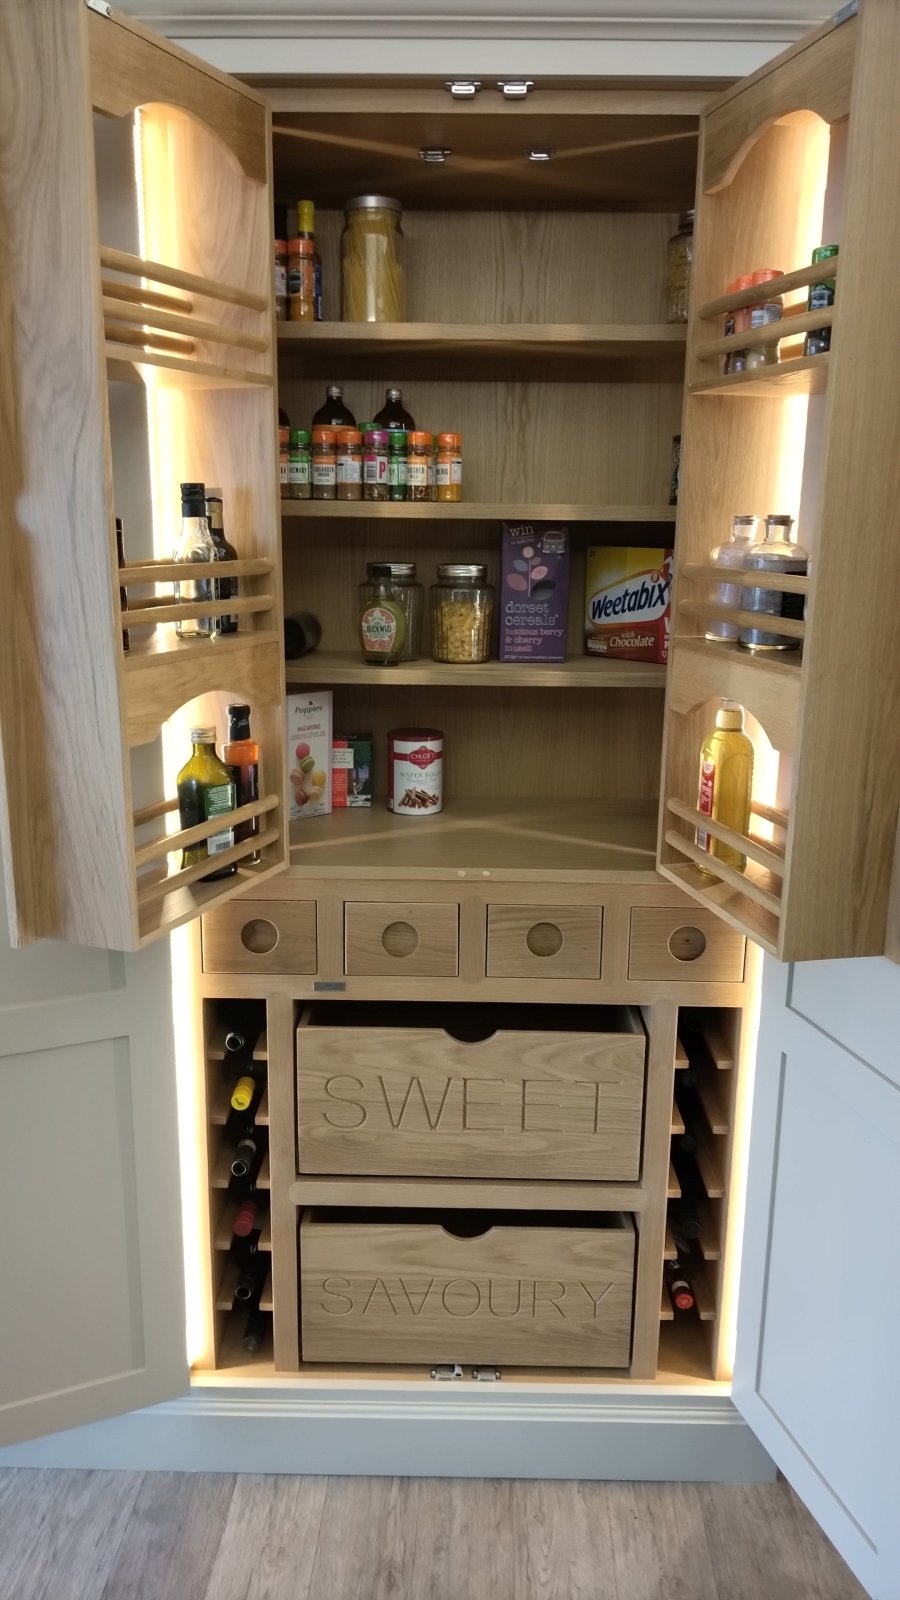 Organising kitchen cupboards - Classic Kitchens Direct